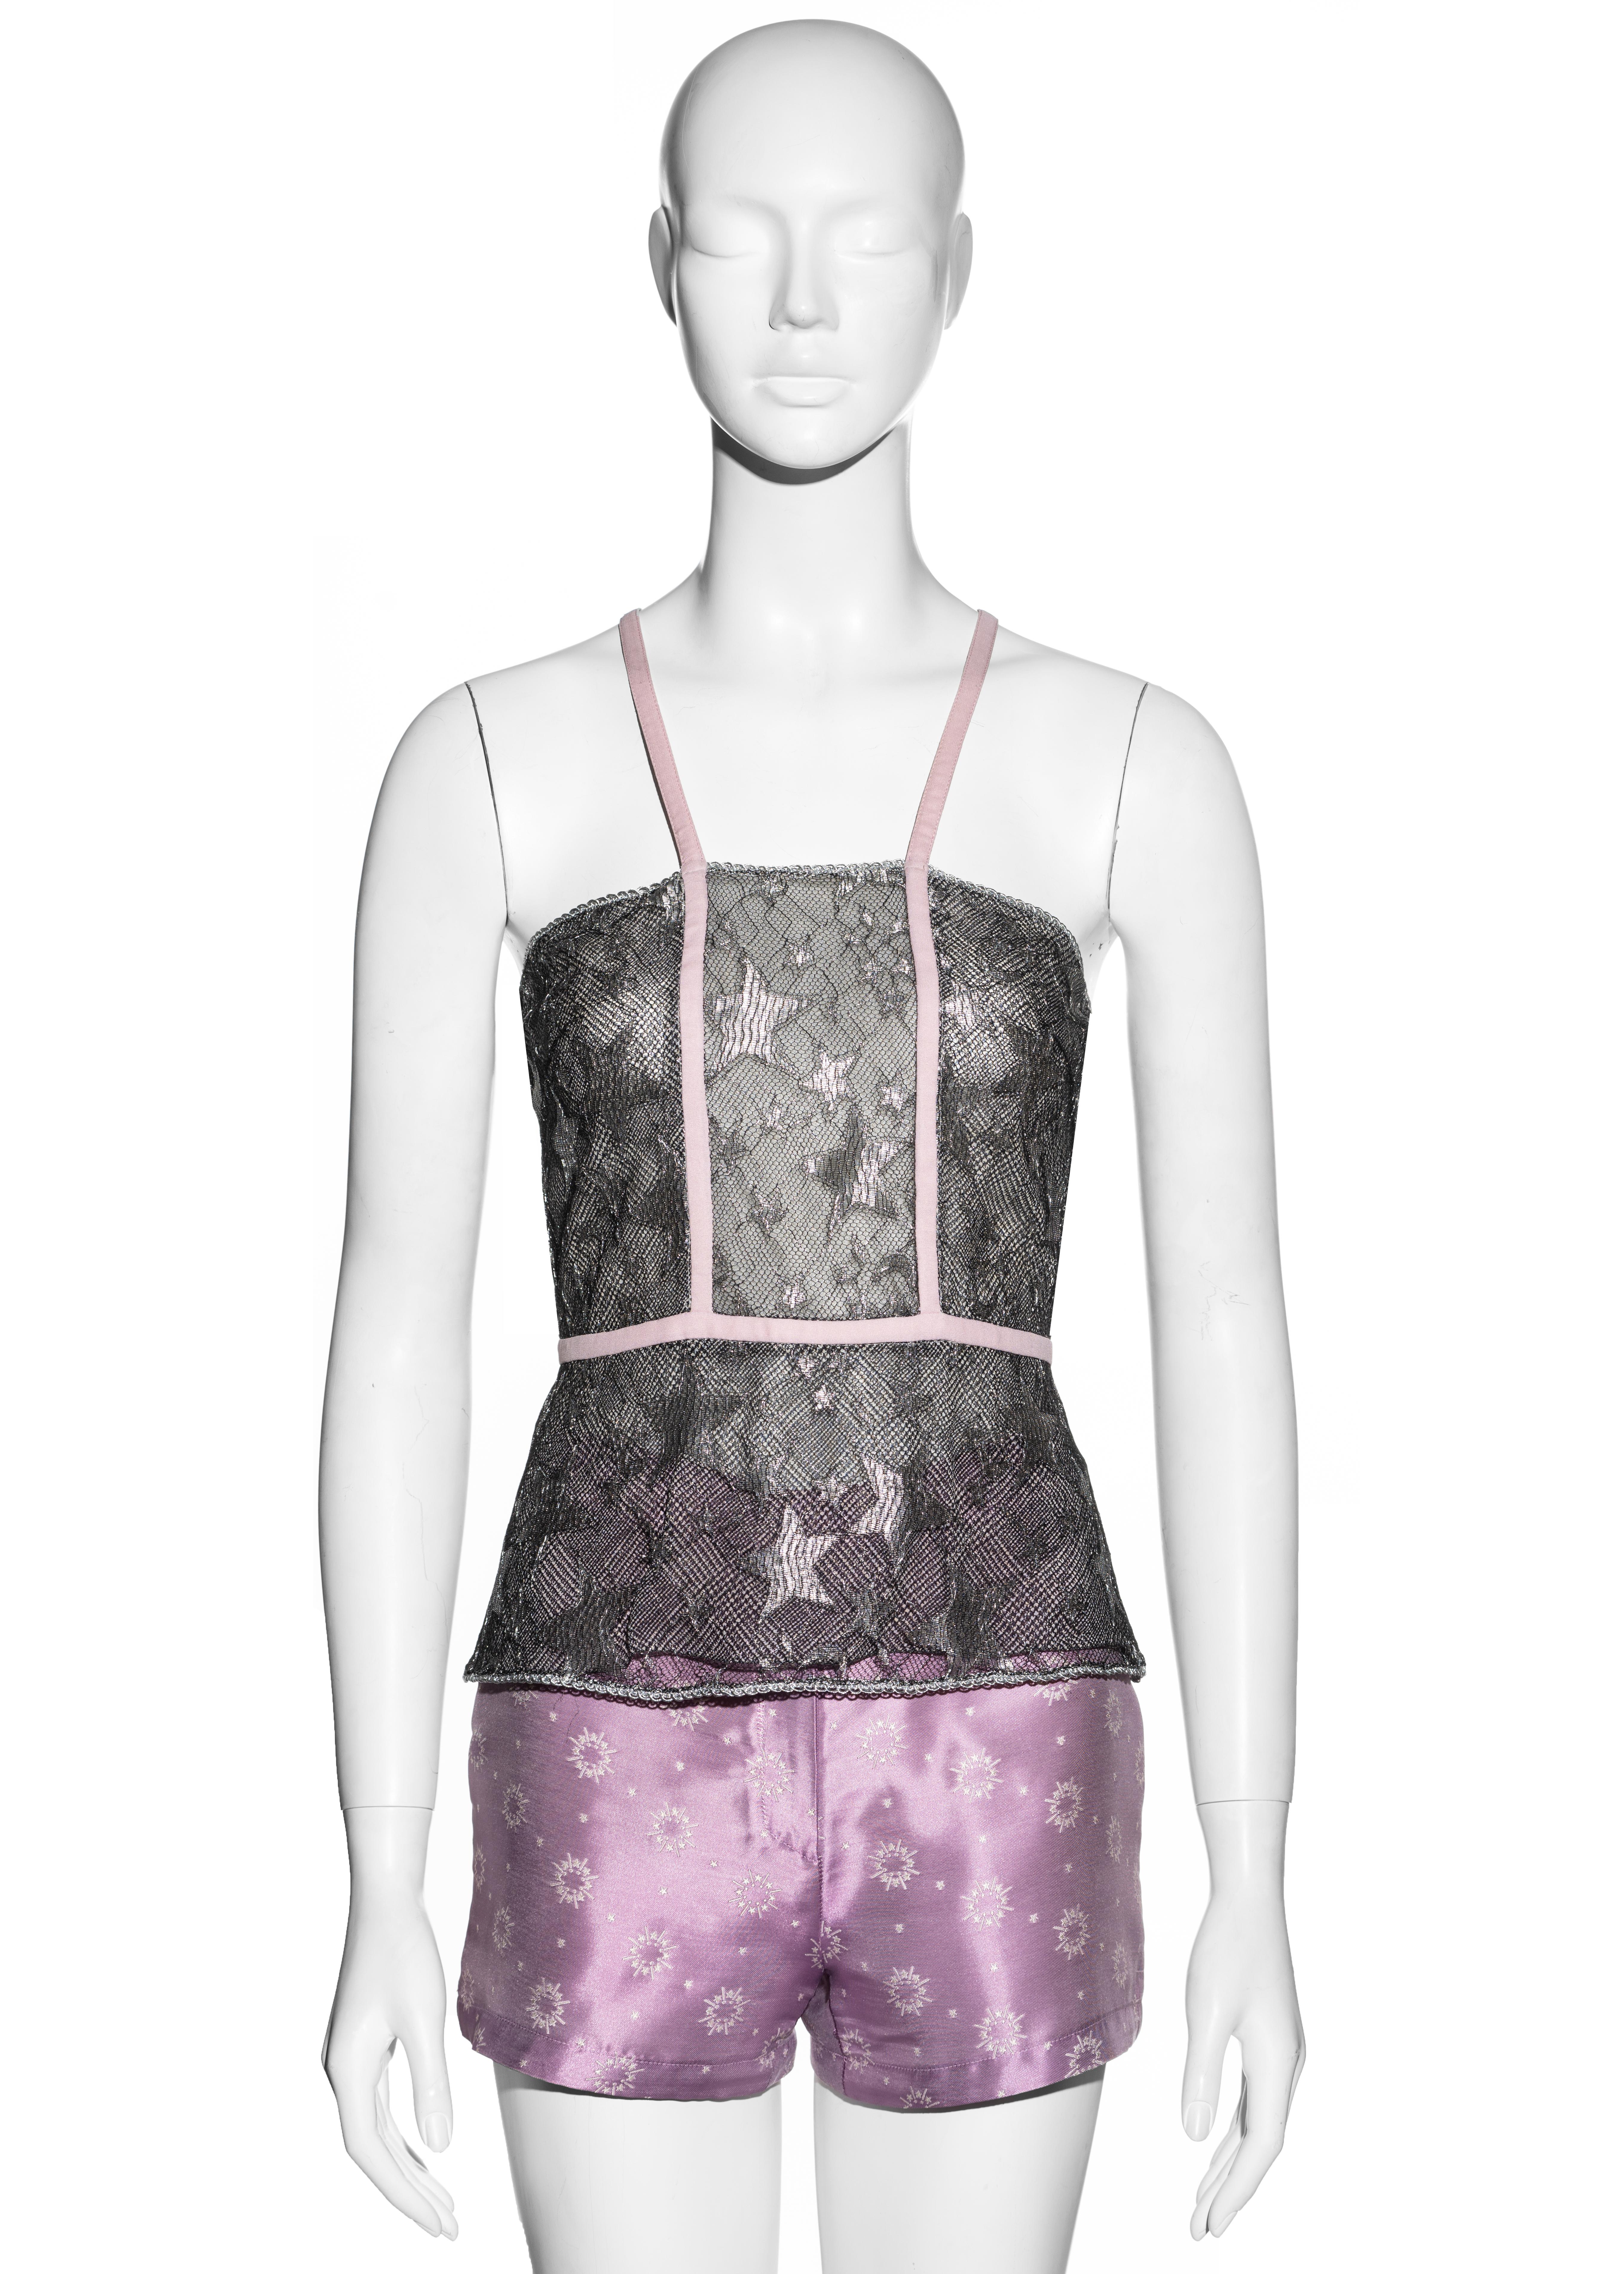 ▪ Gianni Versace wrap vest and hot pants set
▪ Metallic silver net lace with star print 
▪ Pink criss-cross shoulder straps 
▪ Princes of Wales check underlay 
▪ Pink satin jacquard hot pants 
▪ IT 38 - FR 34 - UK 6 - US 2
▪ Spring-Summer 1998